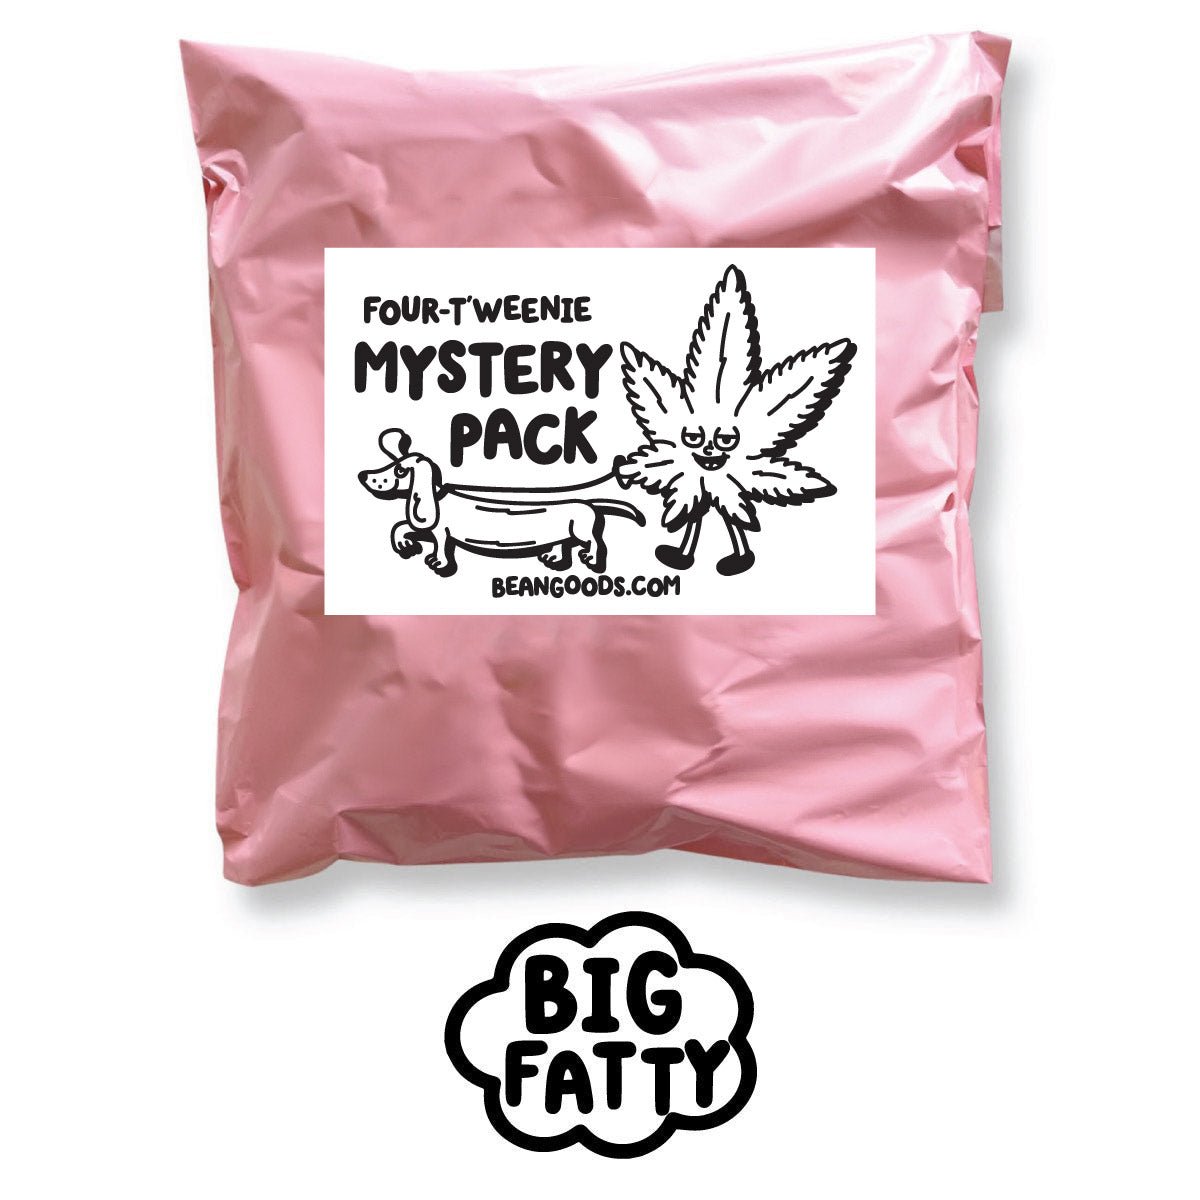 *100 PACKS AVAILABLE* FOUR-TWEENIE MYSTERY PACK | BIG FATTY - bean goods